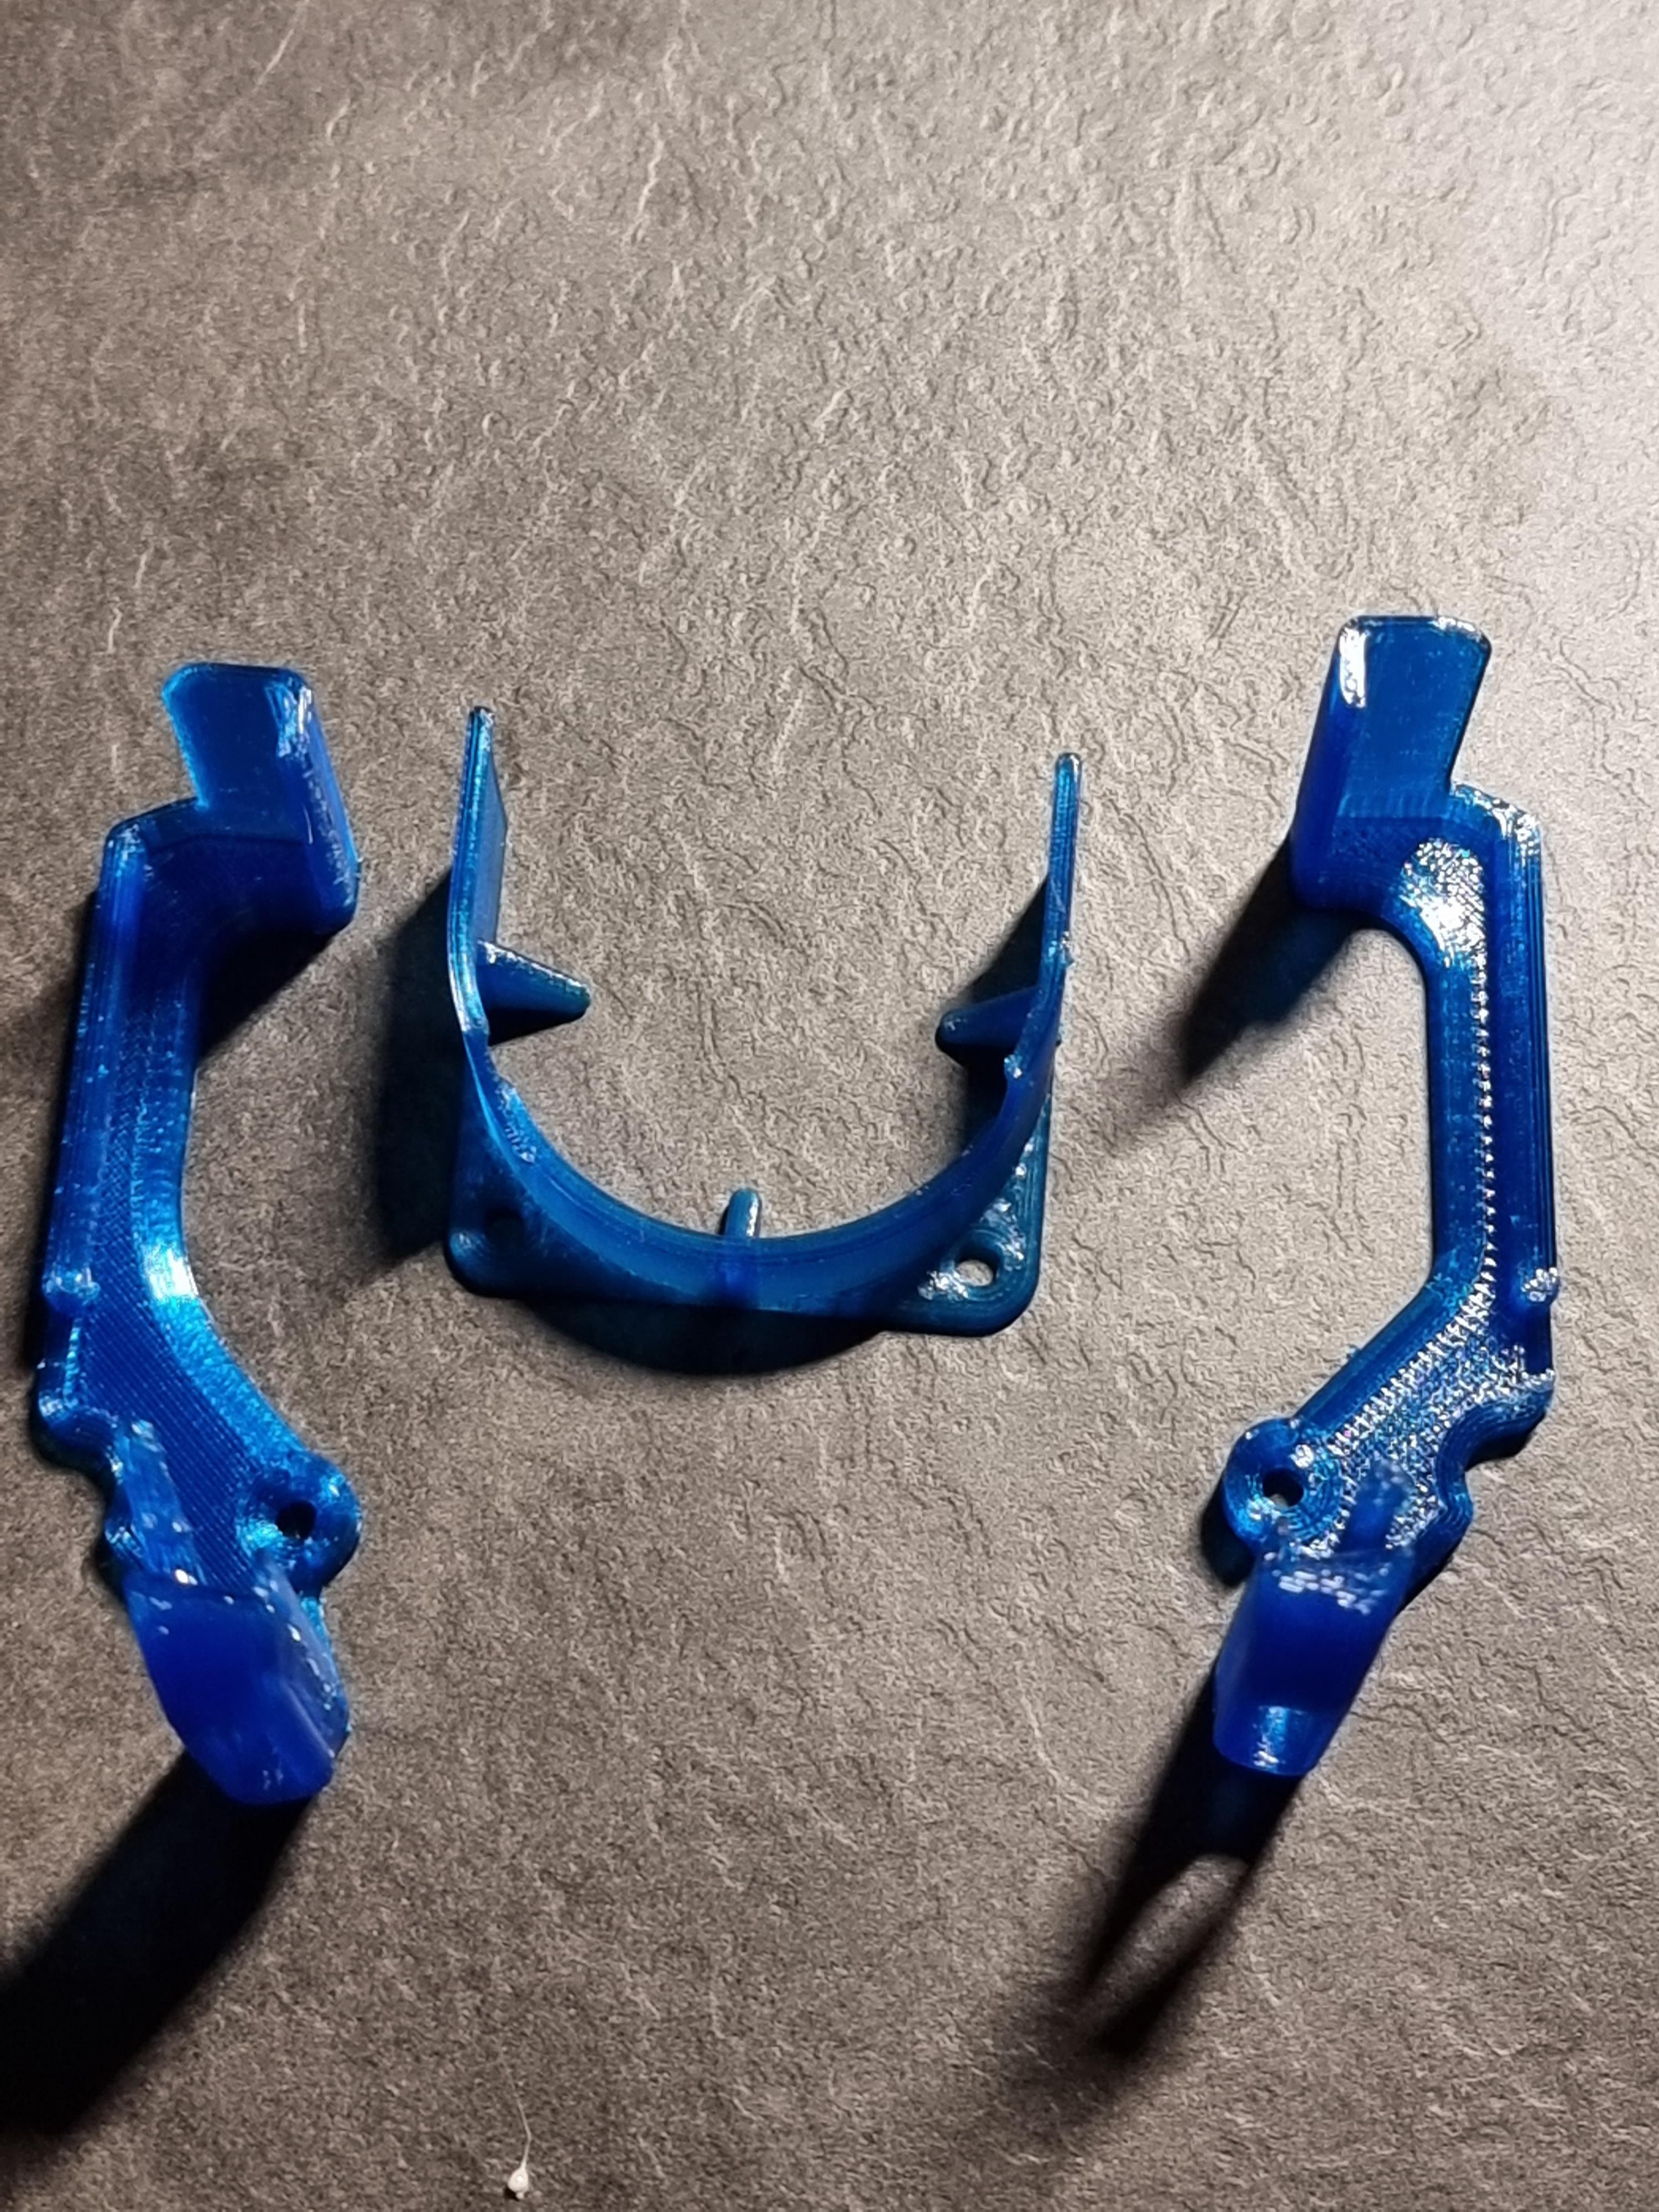 Anycubic Vyper & Kobra Max Part Cooling Duct UPGRADE! - Improved print quality - Printed using PETG on Artillery Genius, Easy to install. - 3d model